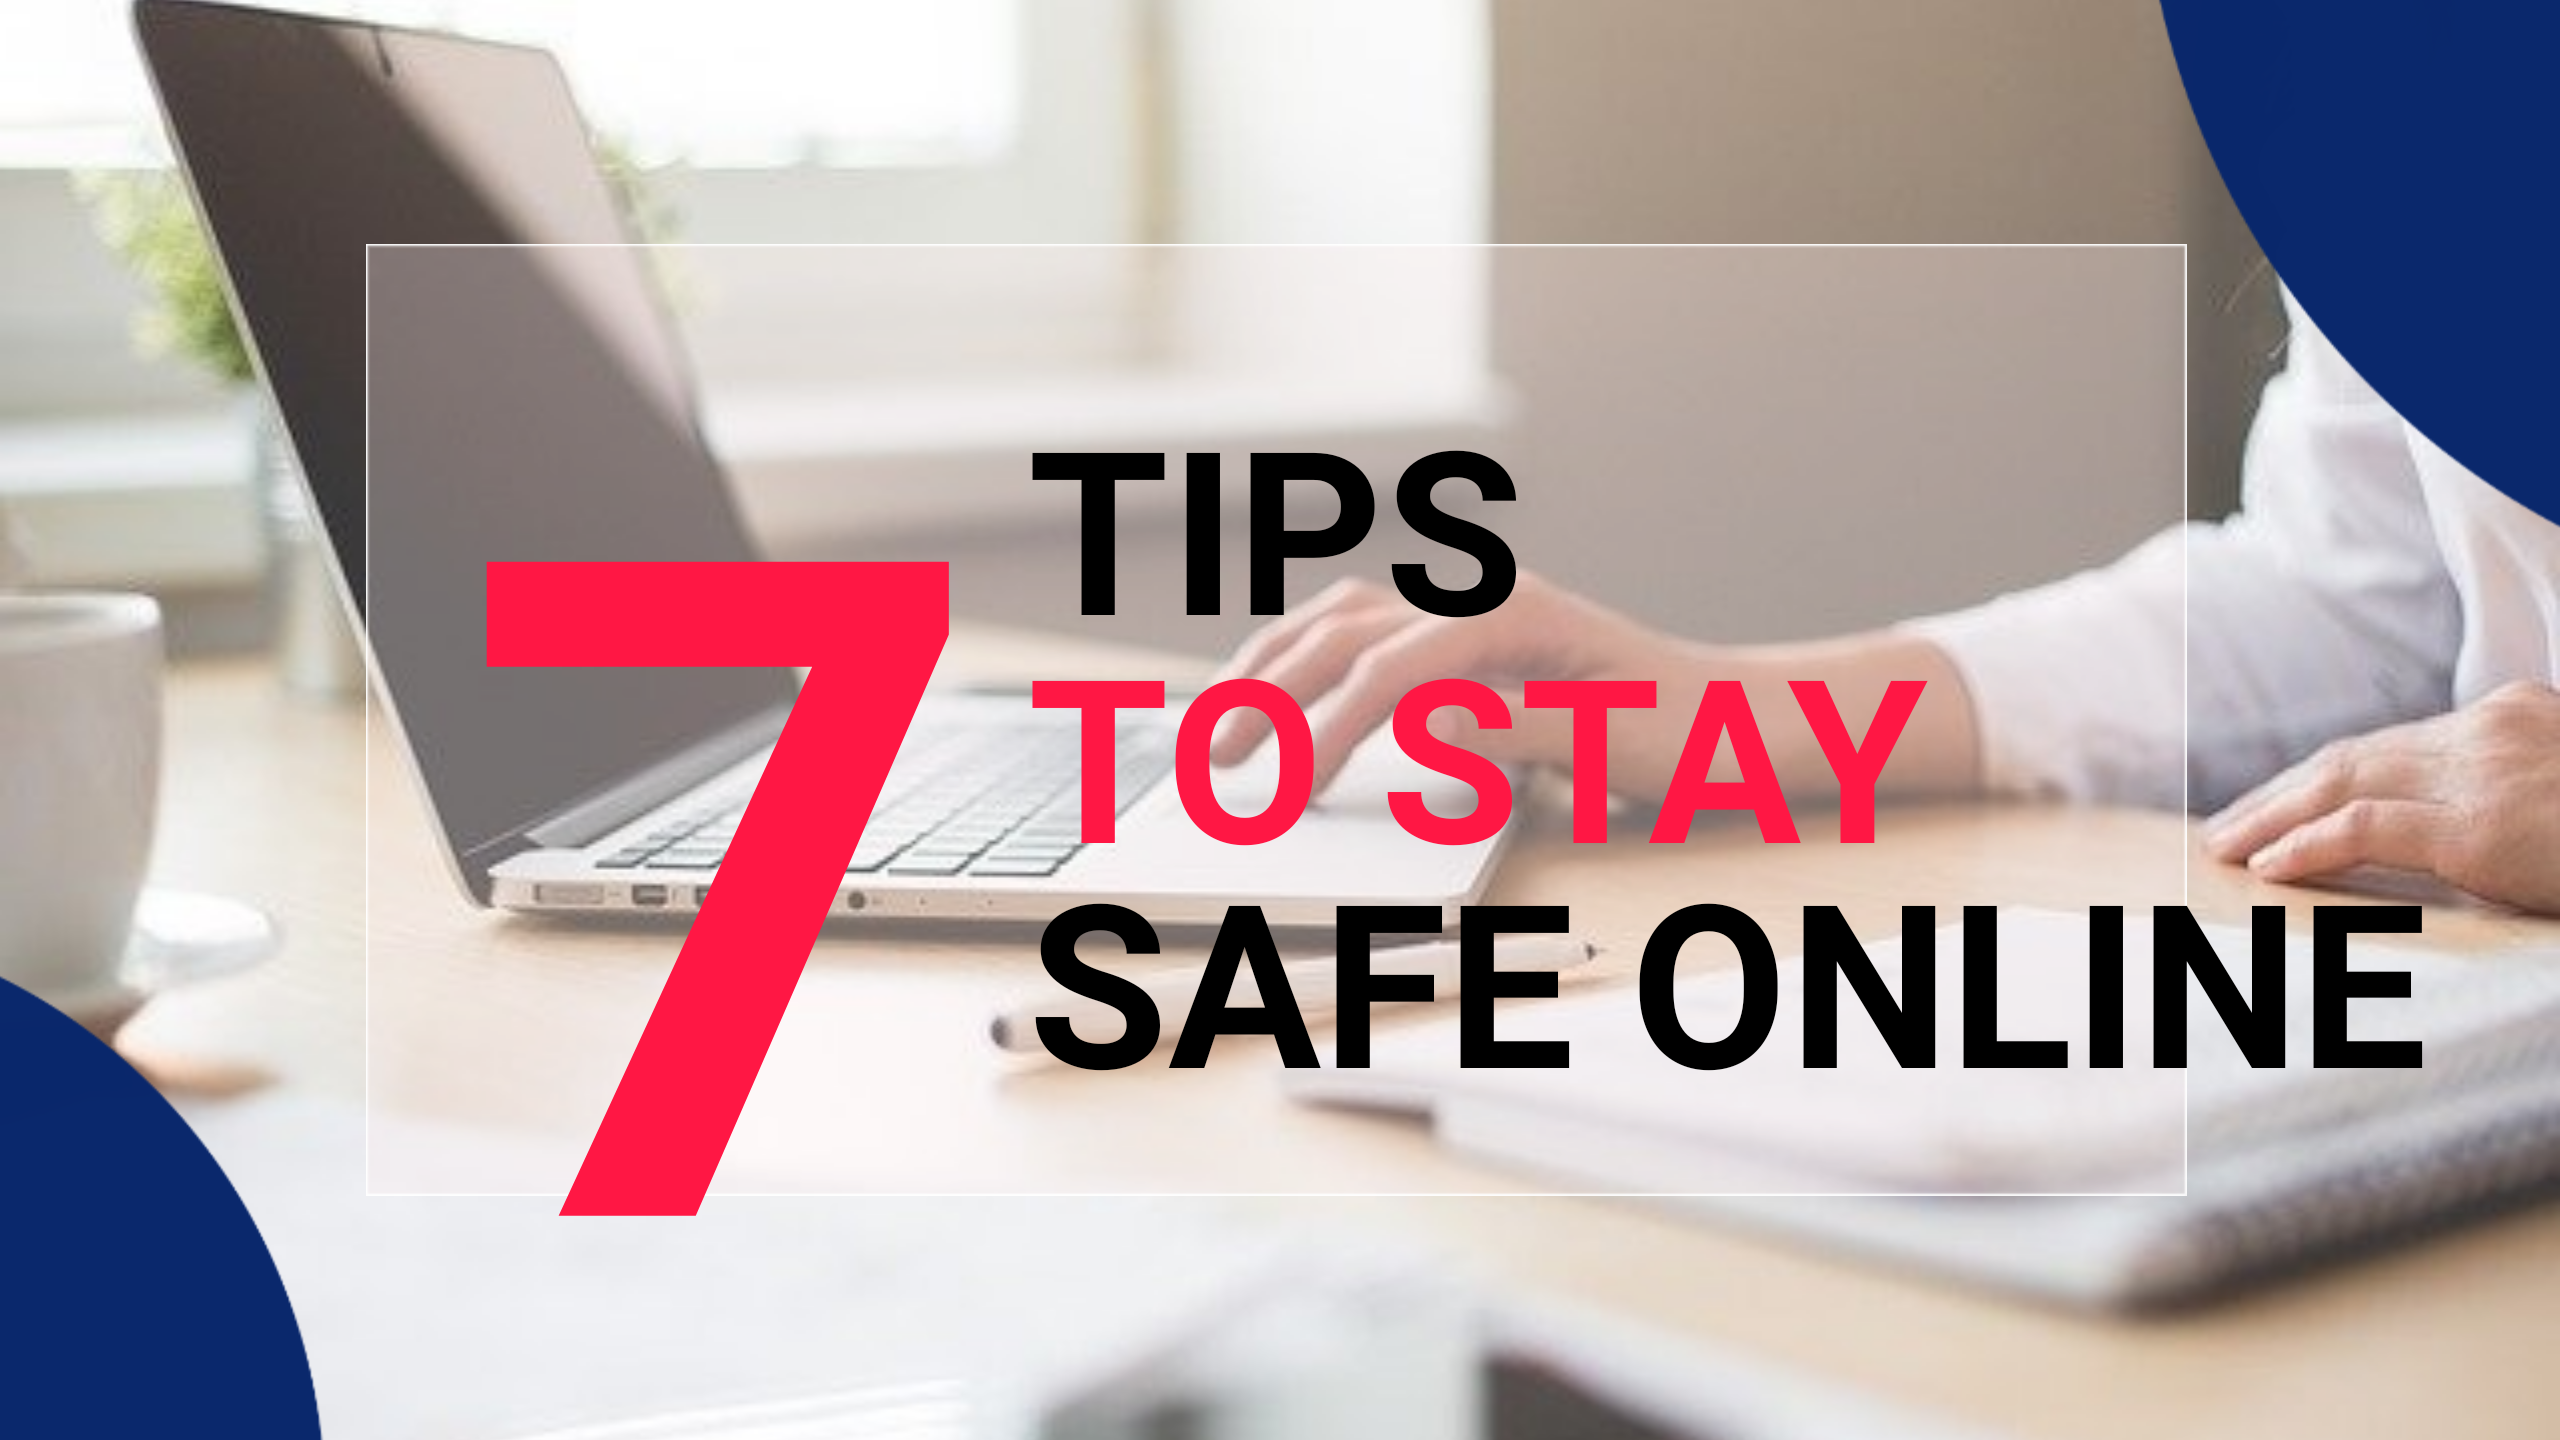 HOW TO BE SAFE ONLINE